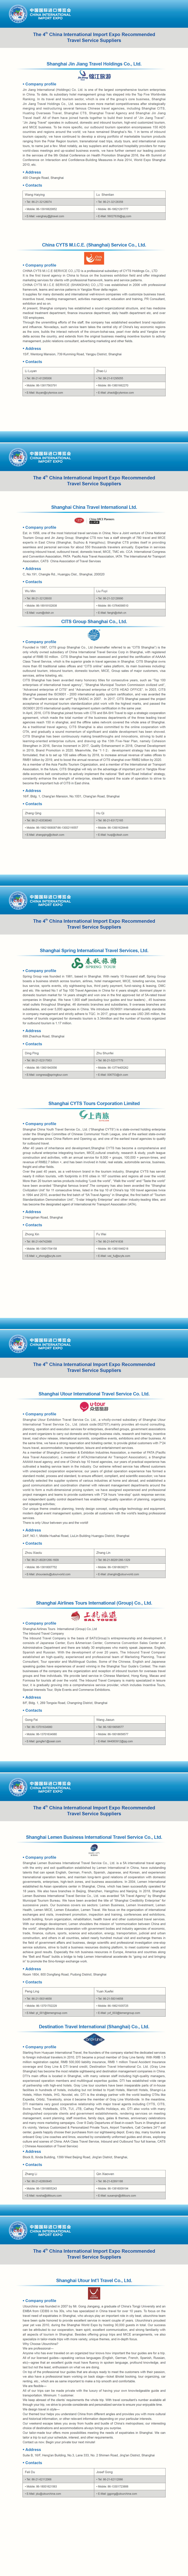 The 4th China International Import Expo Recommended Travel Service Suppliers.jpg